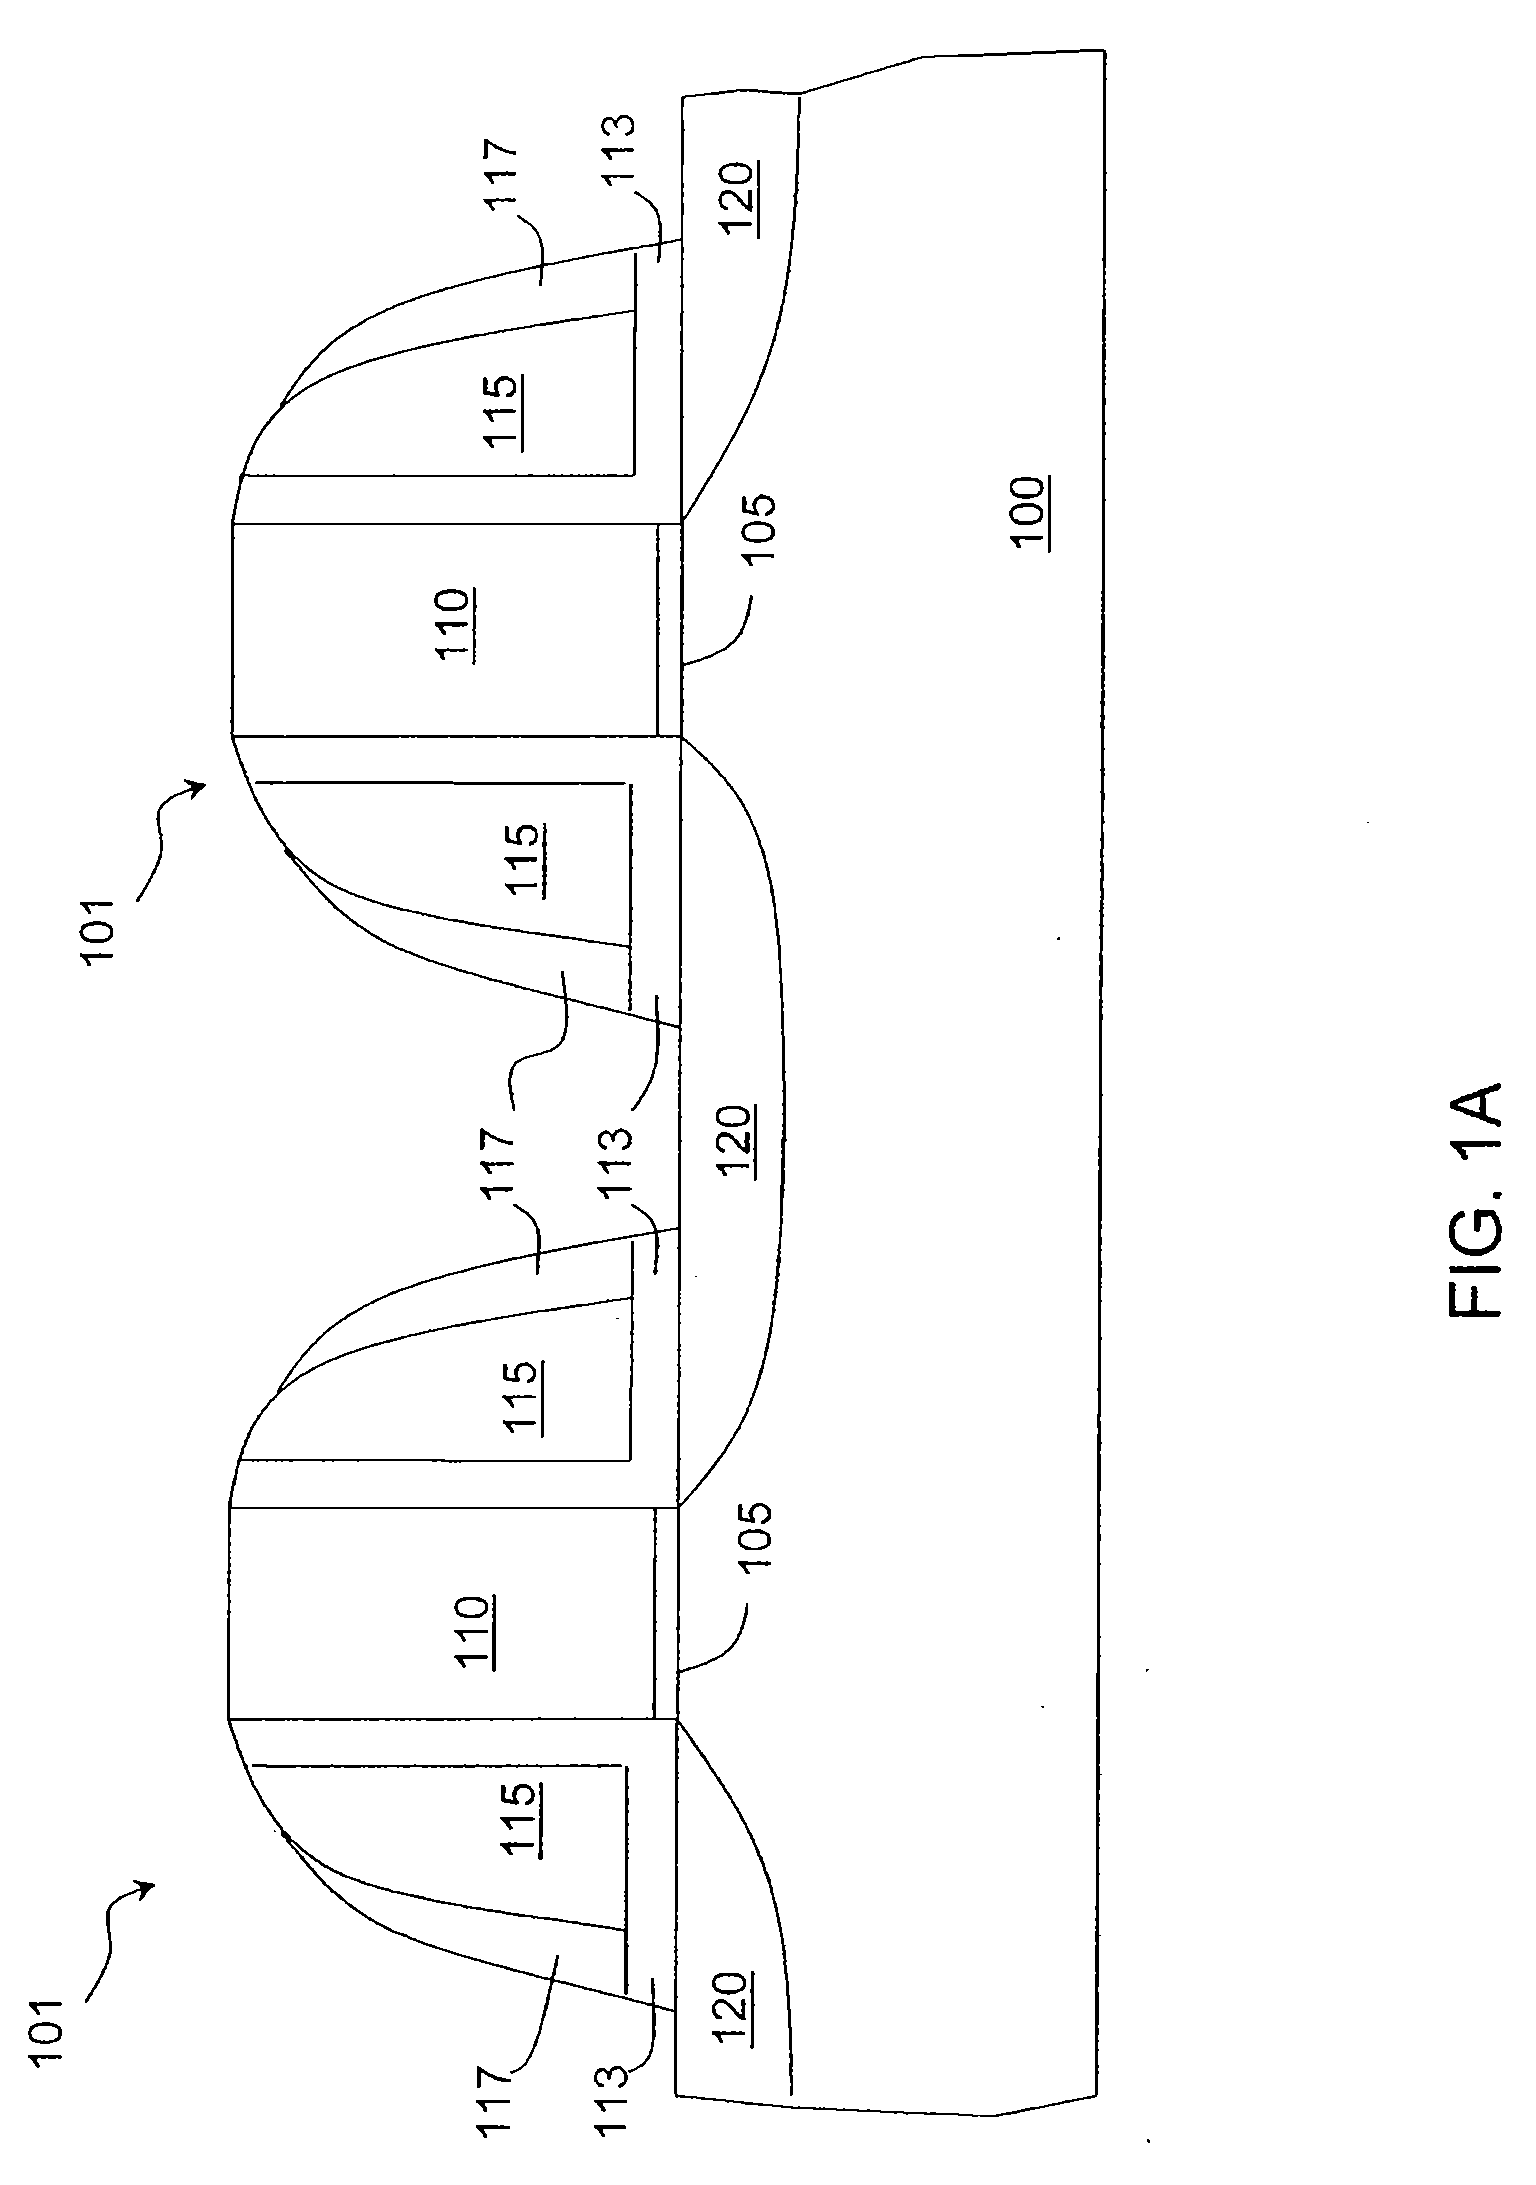 Methods and Systems for Forming at Least One Dielectric Layer